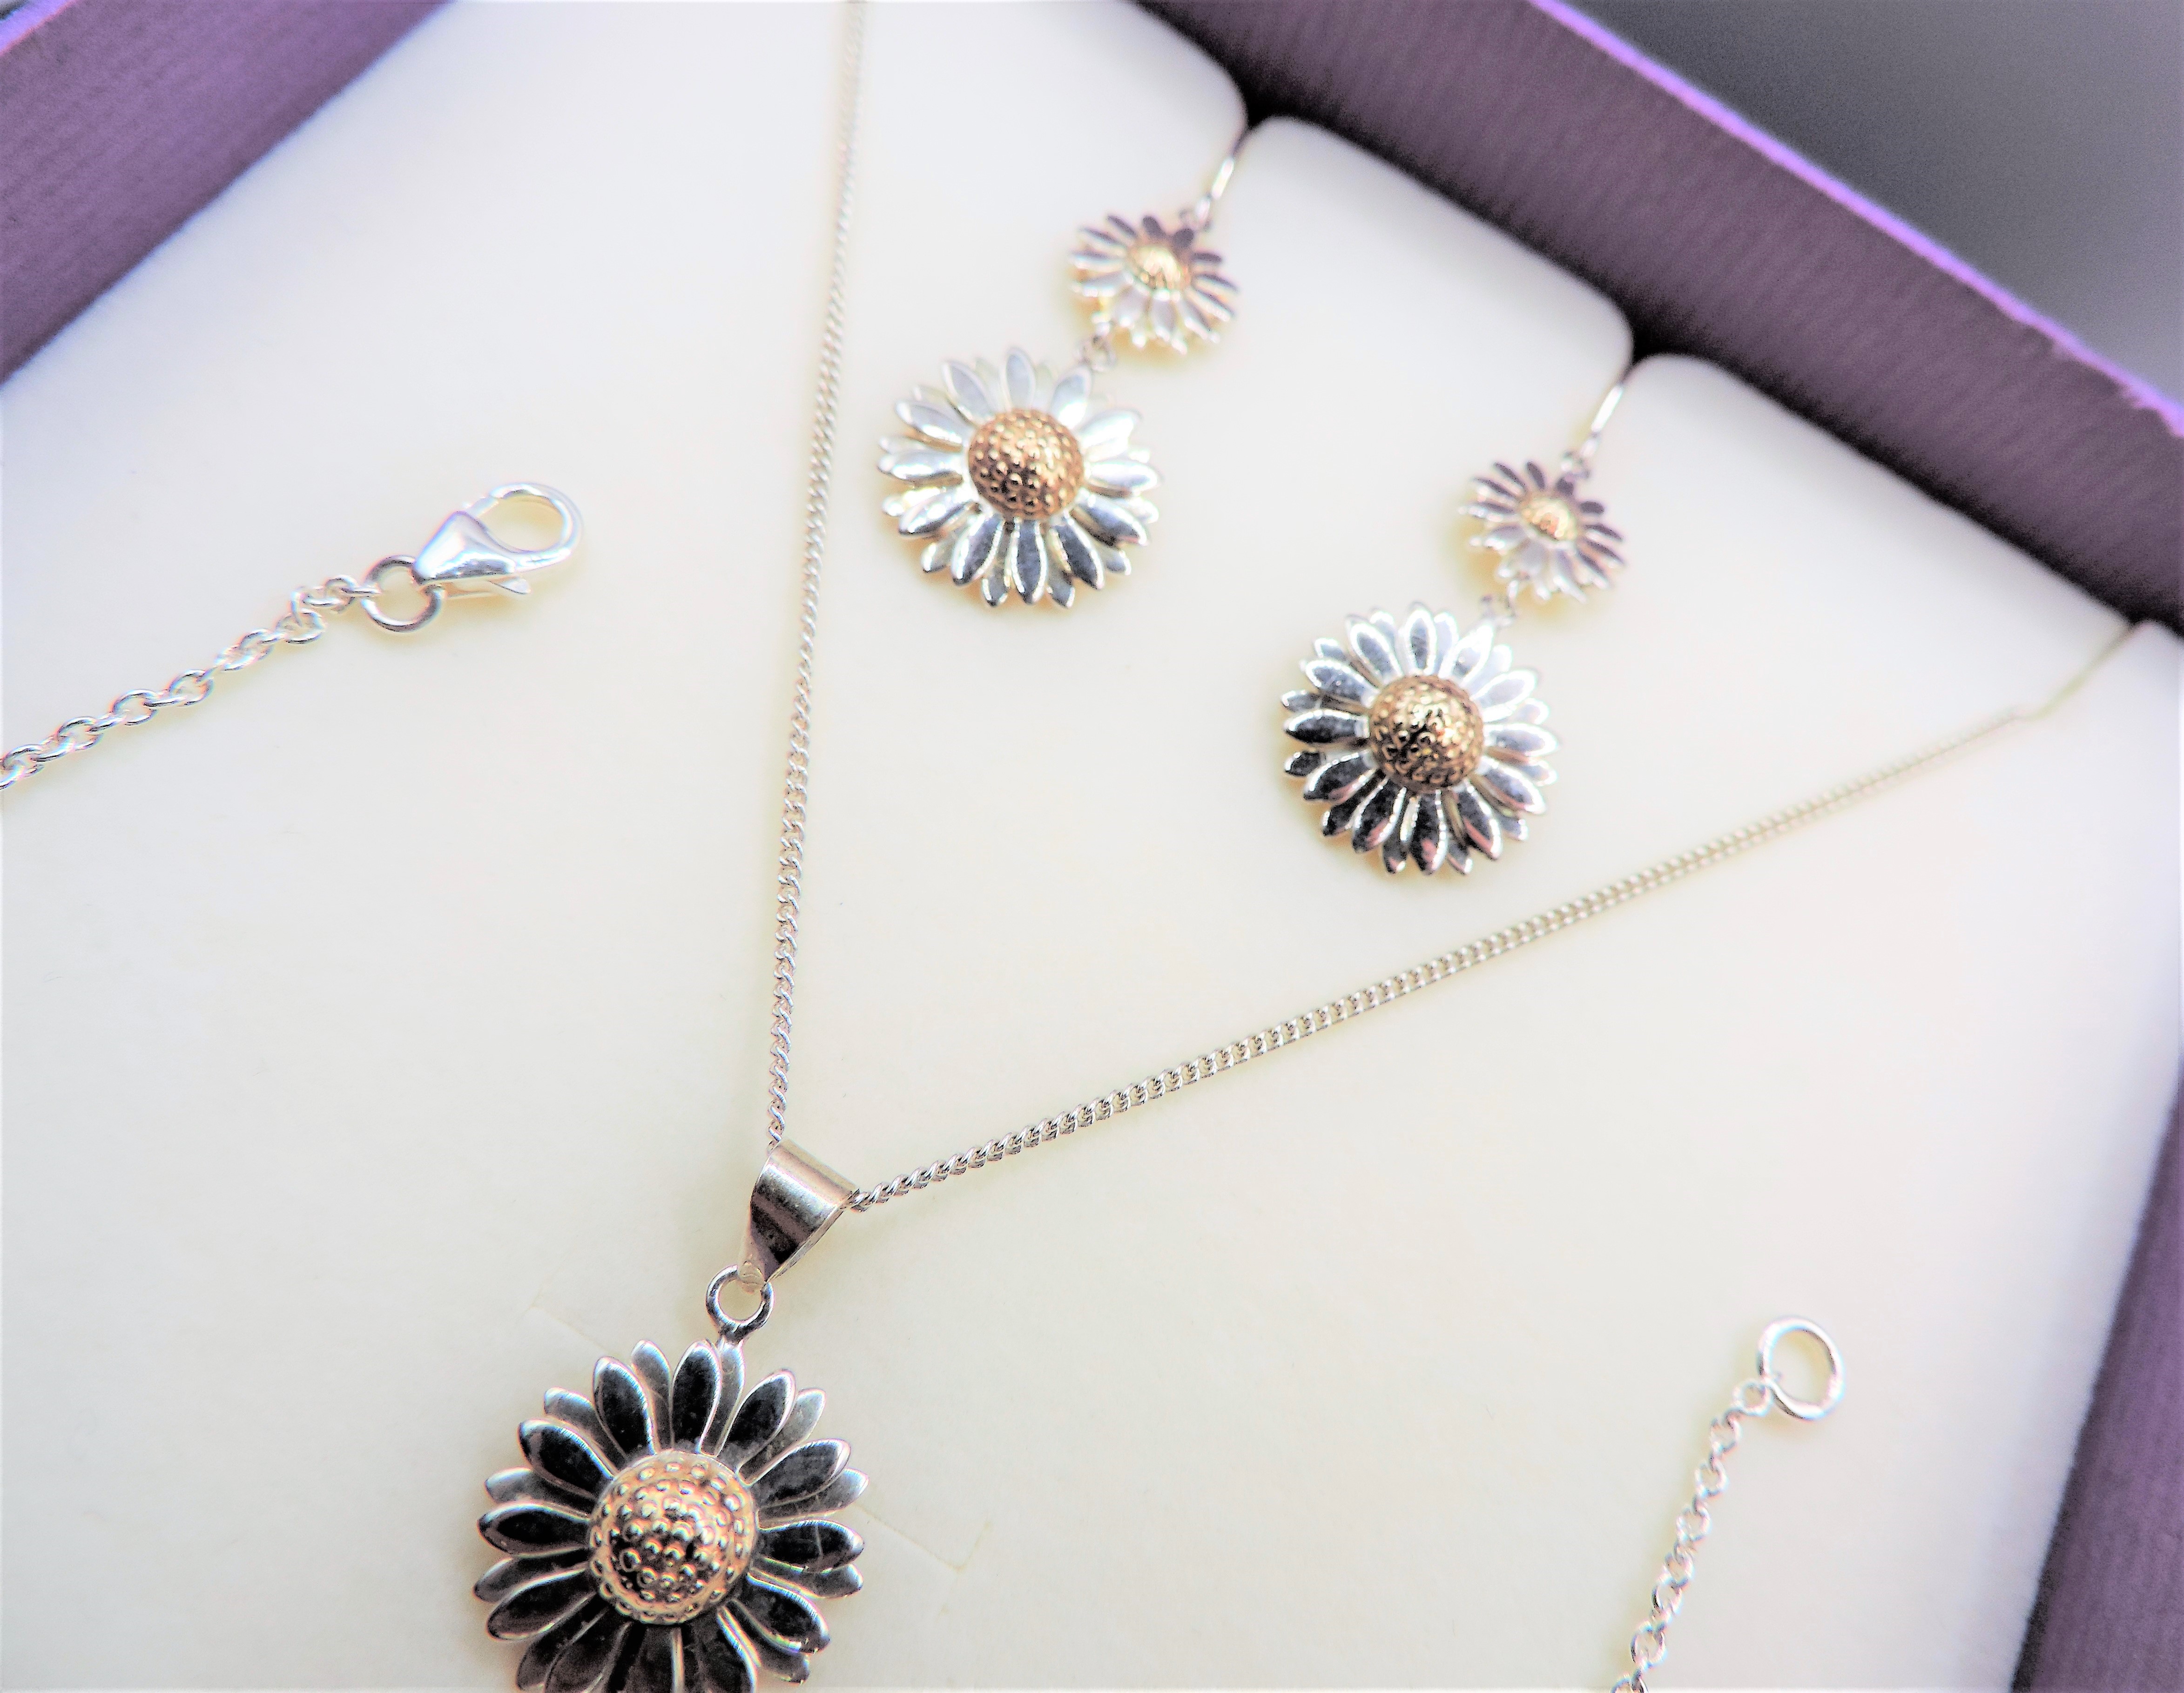 Gold & Sterling Silver Daisy Necklace Bracelet & Earrings Set New with Gift Box - Image 2 of 3